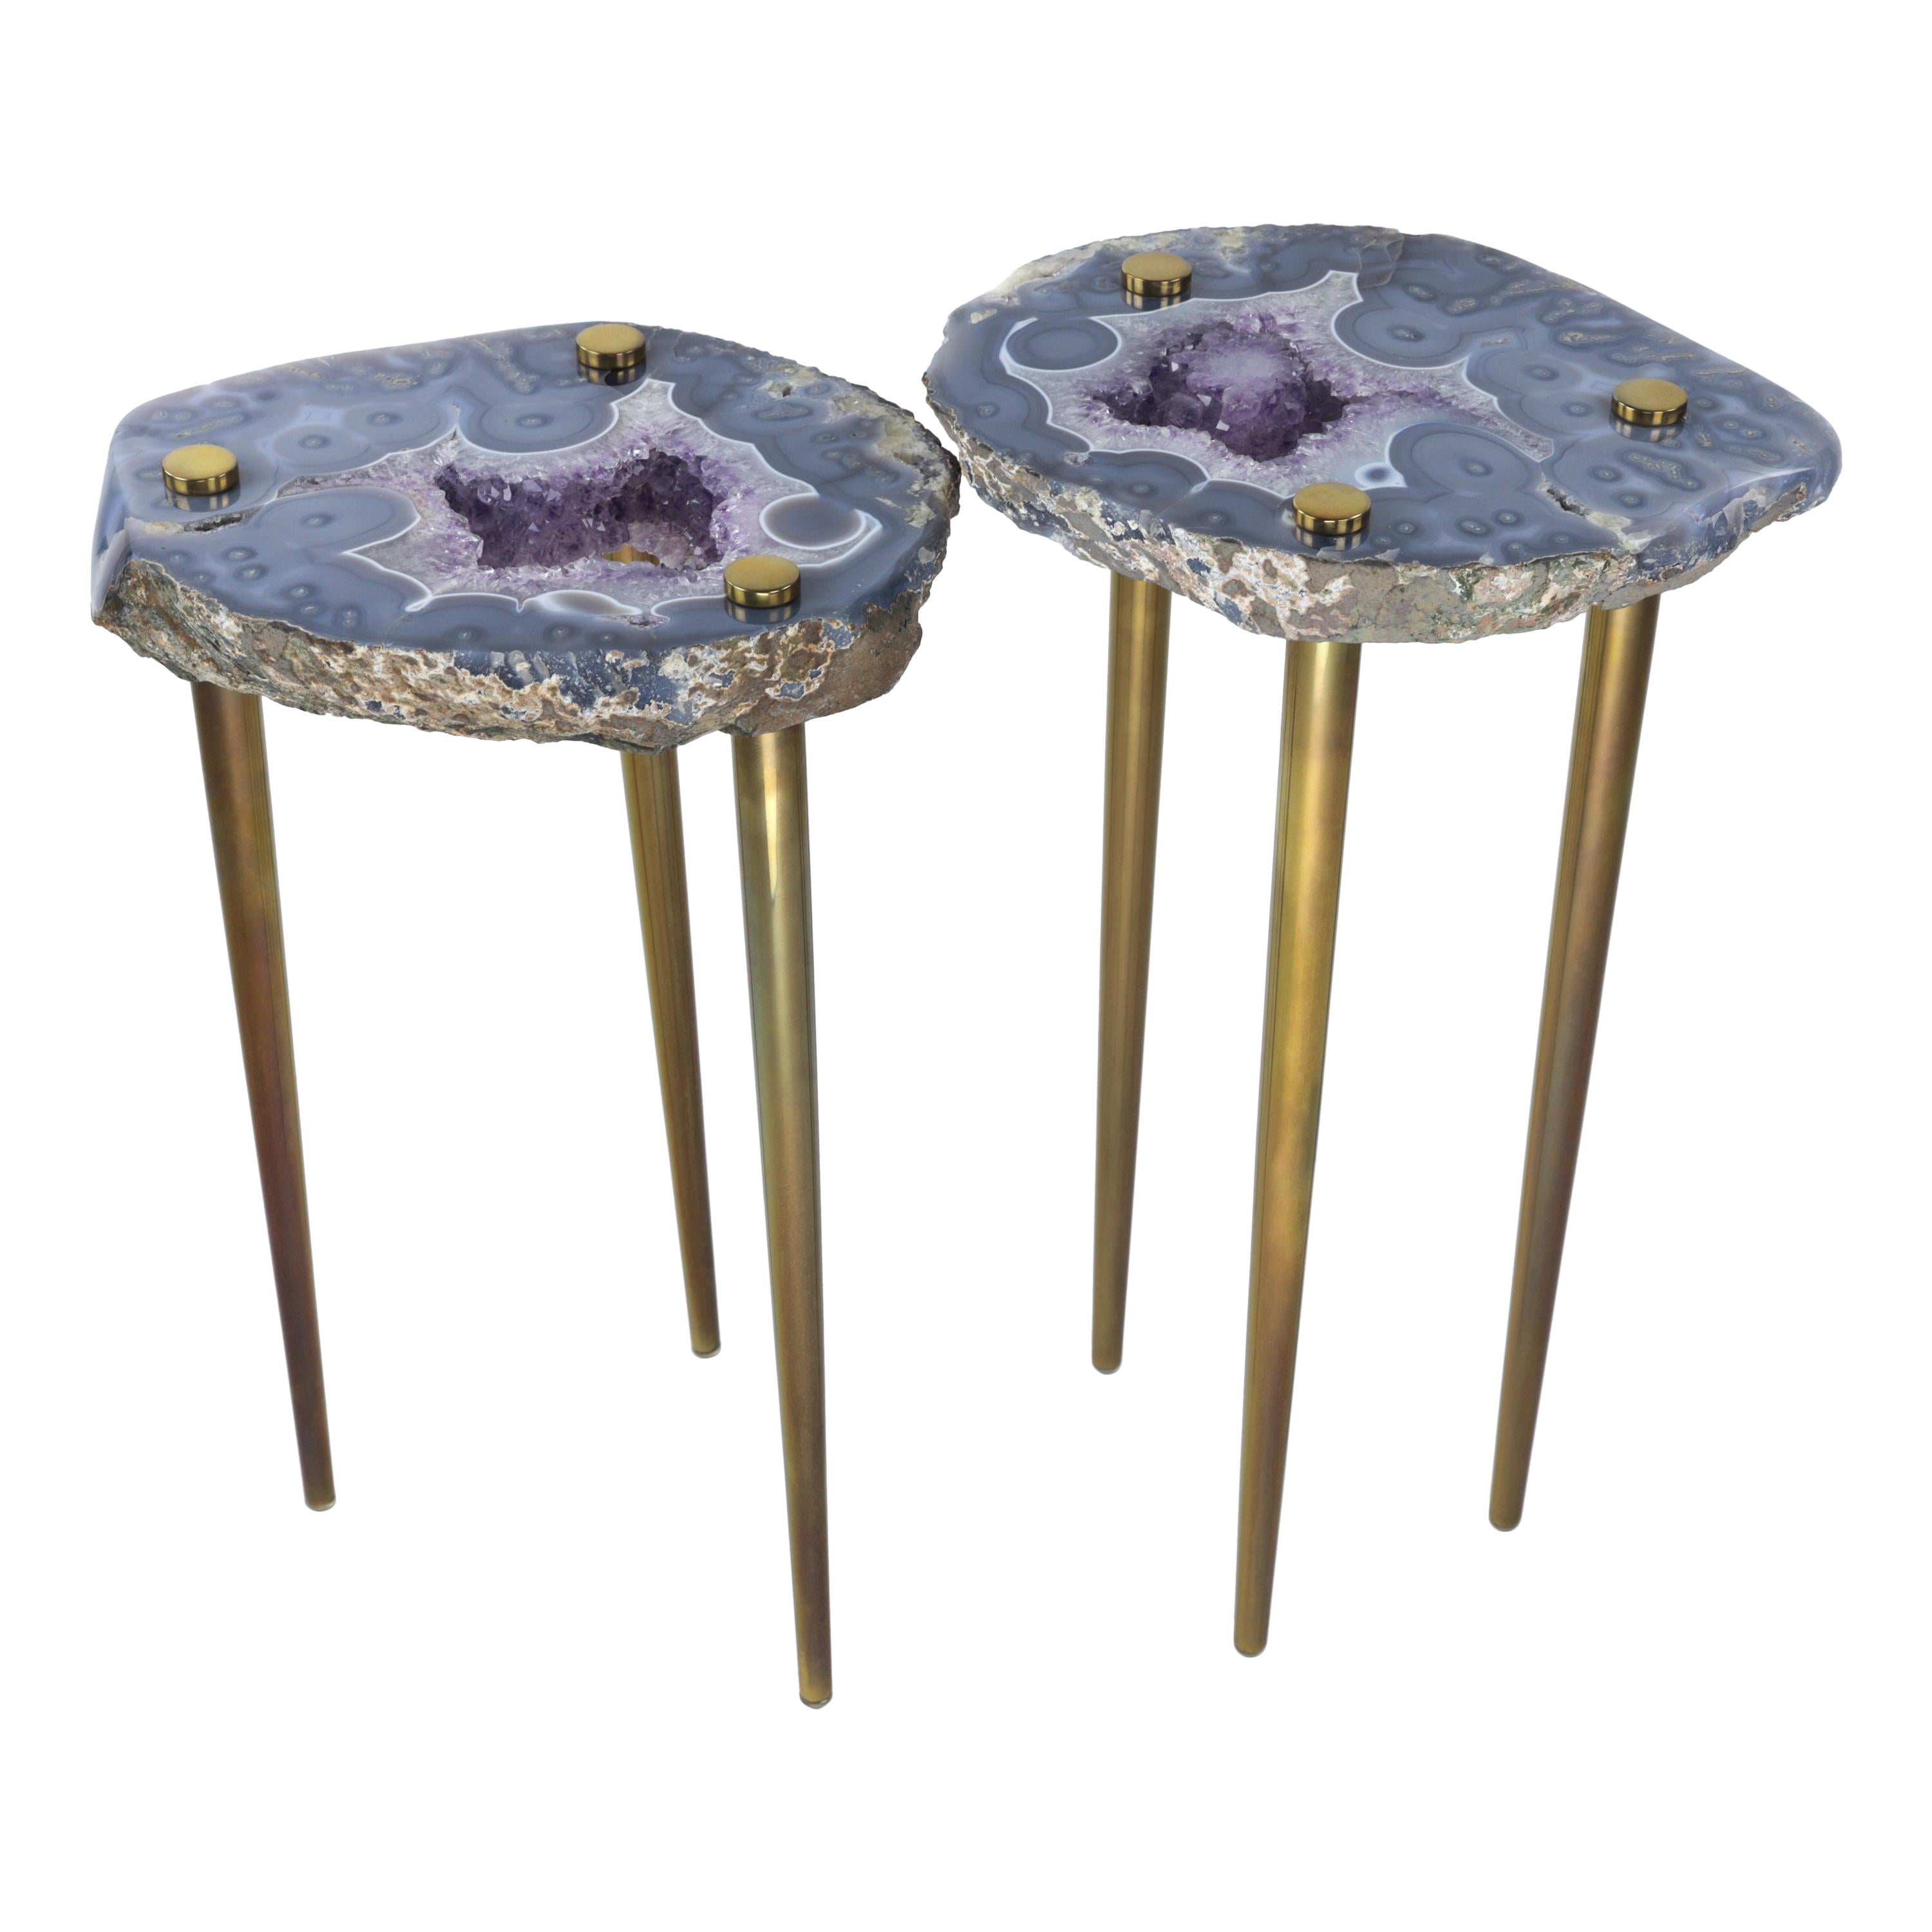 Set of Two "Powers of 10" Tables w/ solid brass legs by Christopher Kreiling 